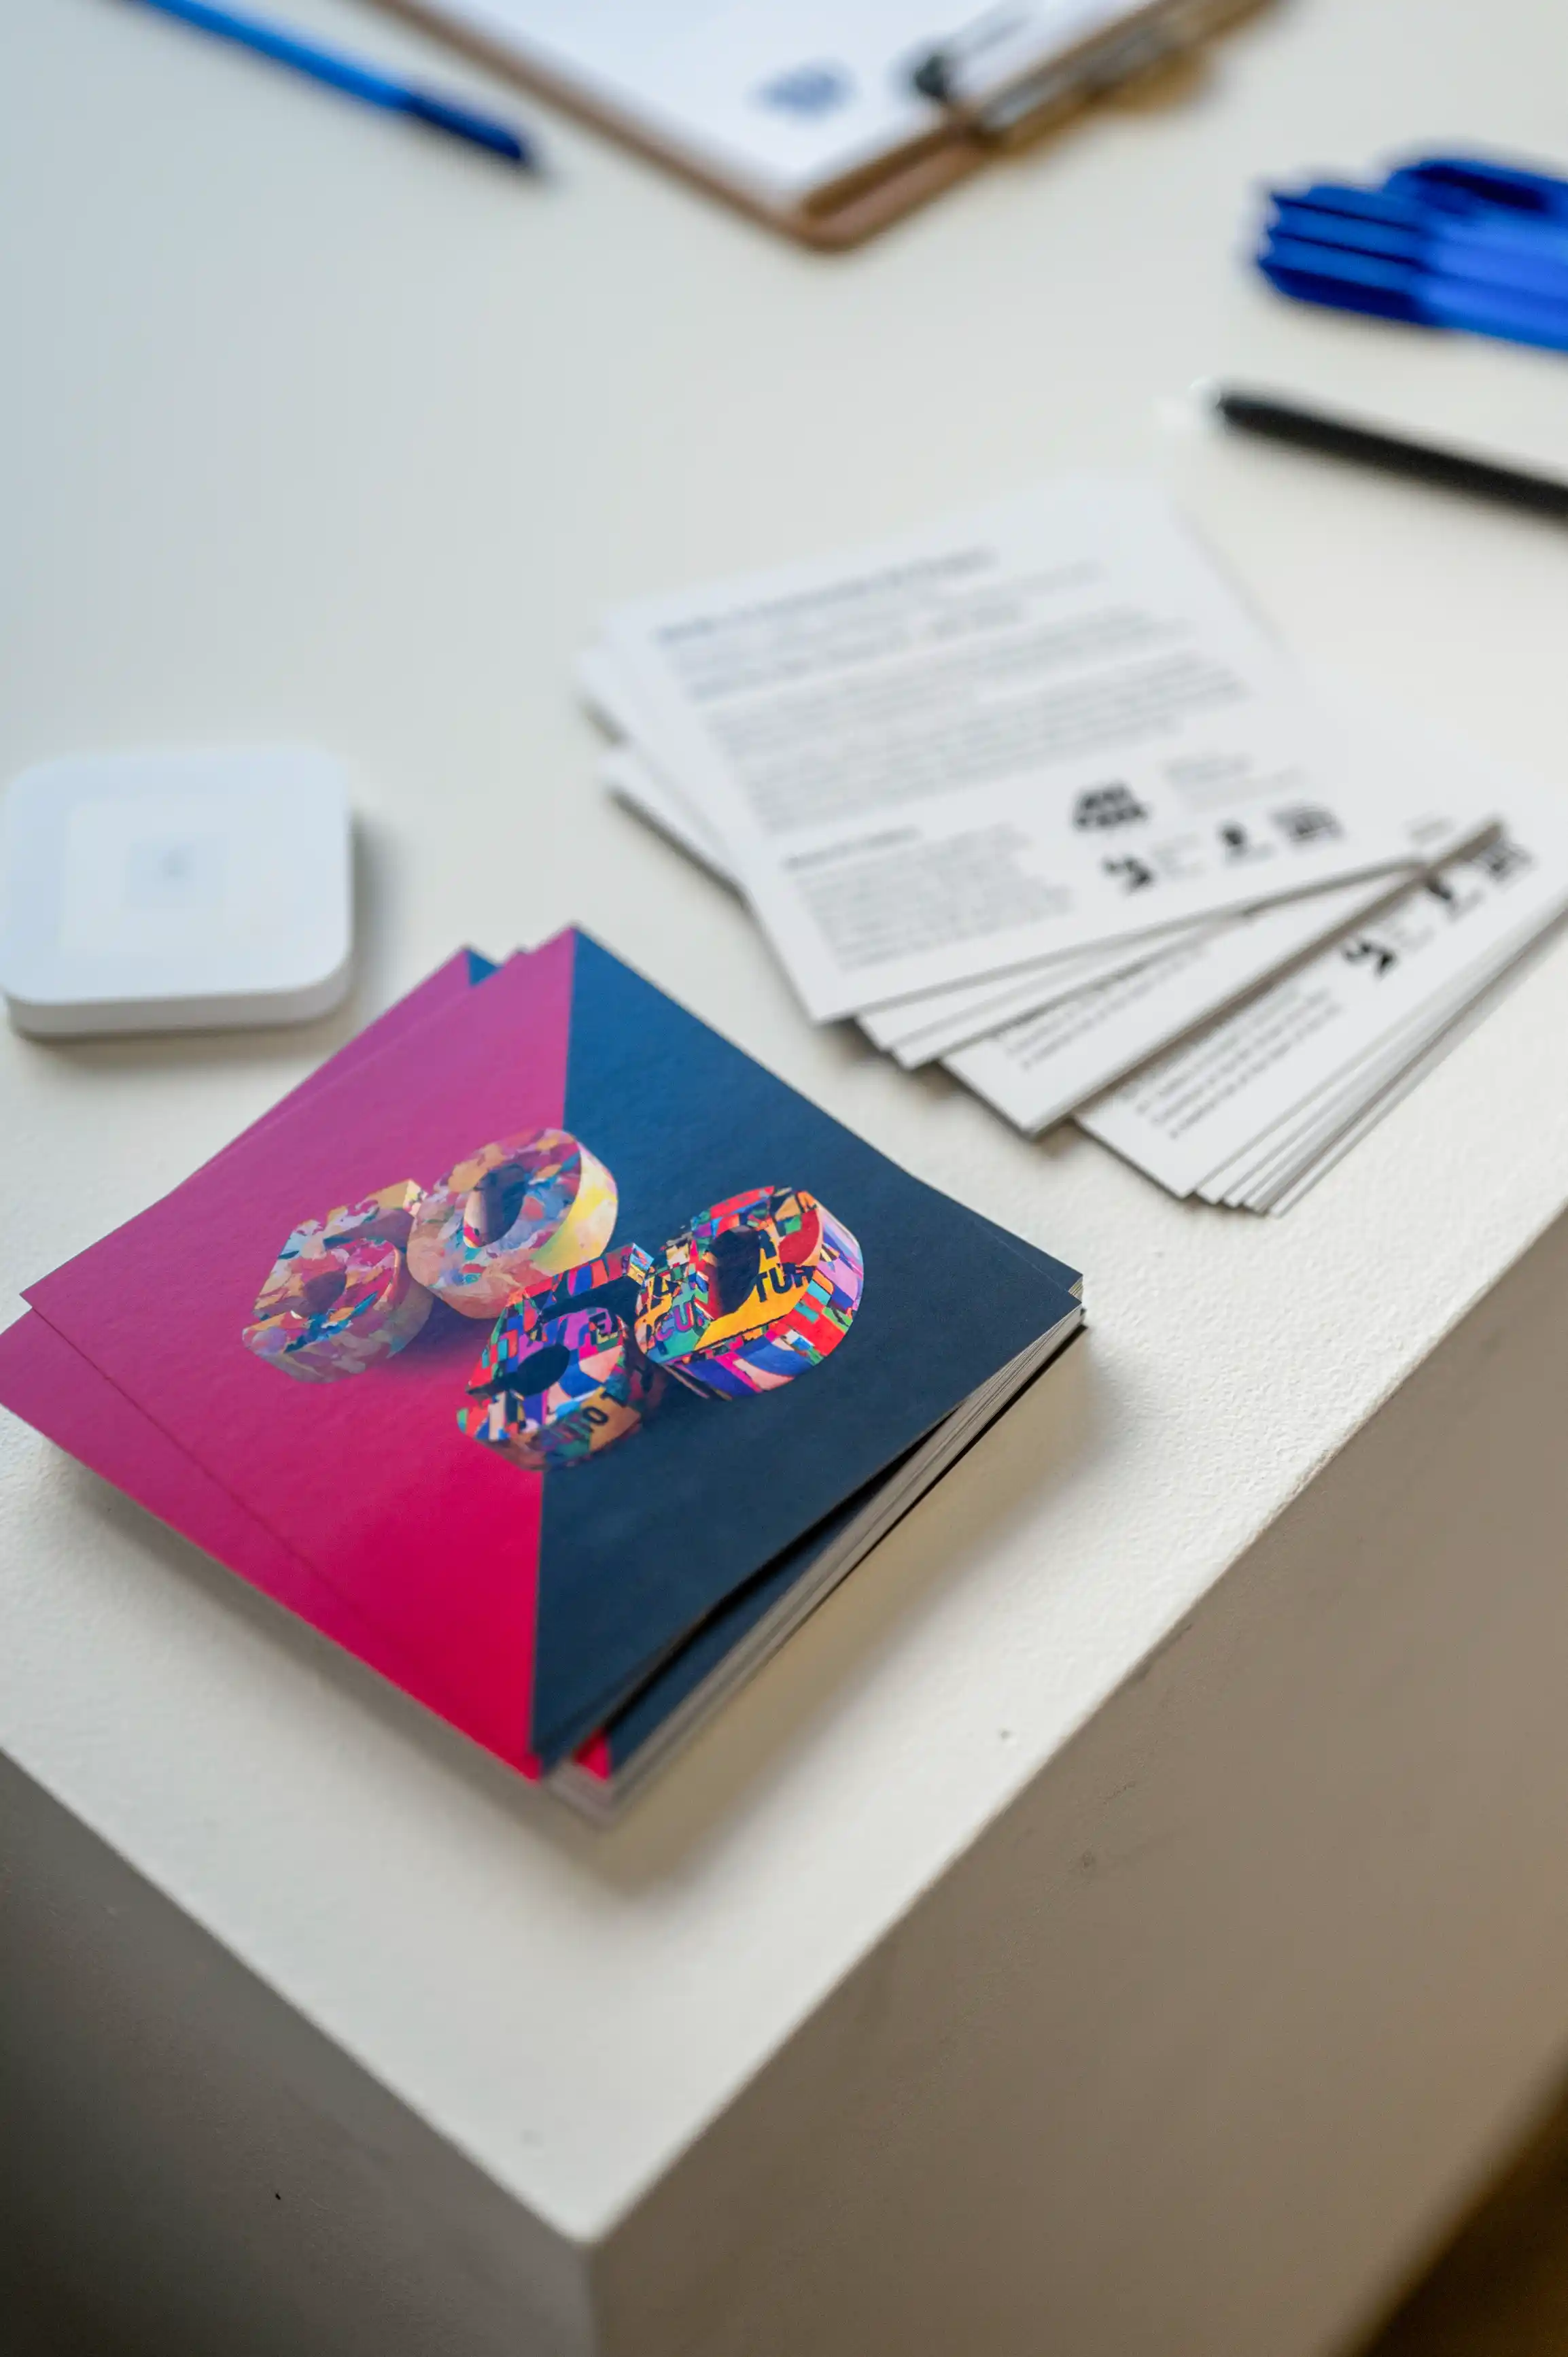 A stack of colorful brochures on a white table with documents and writing utensils in the background.